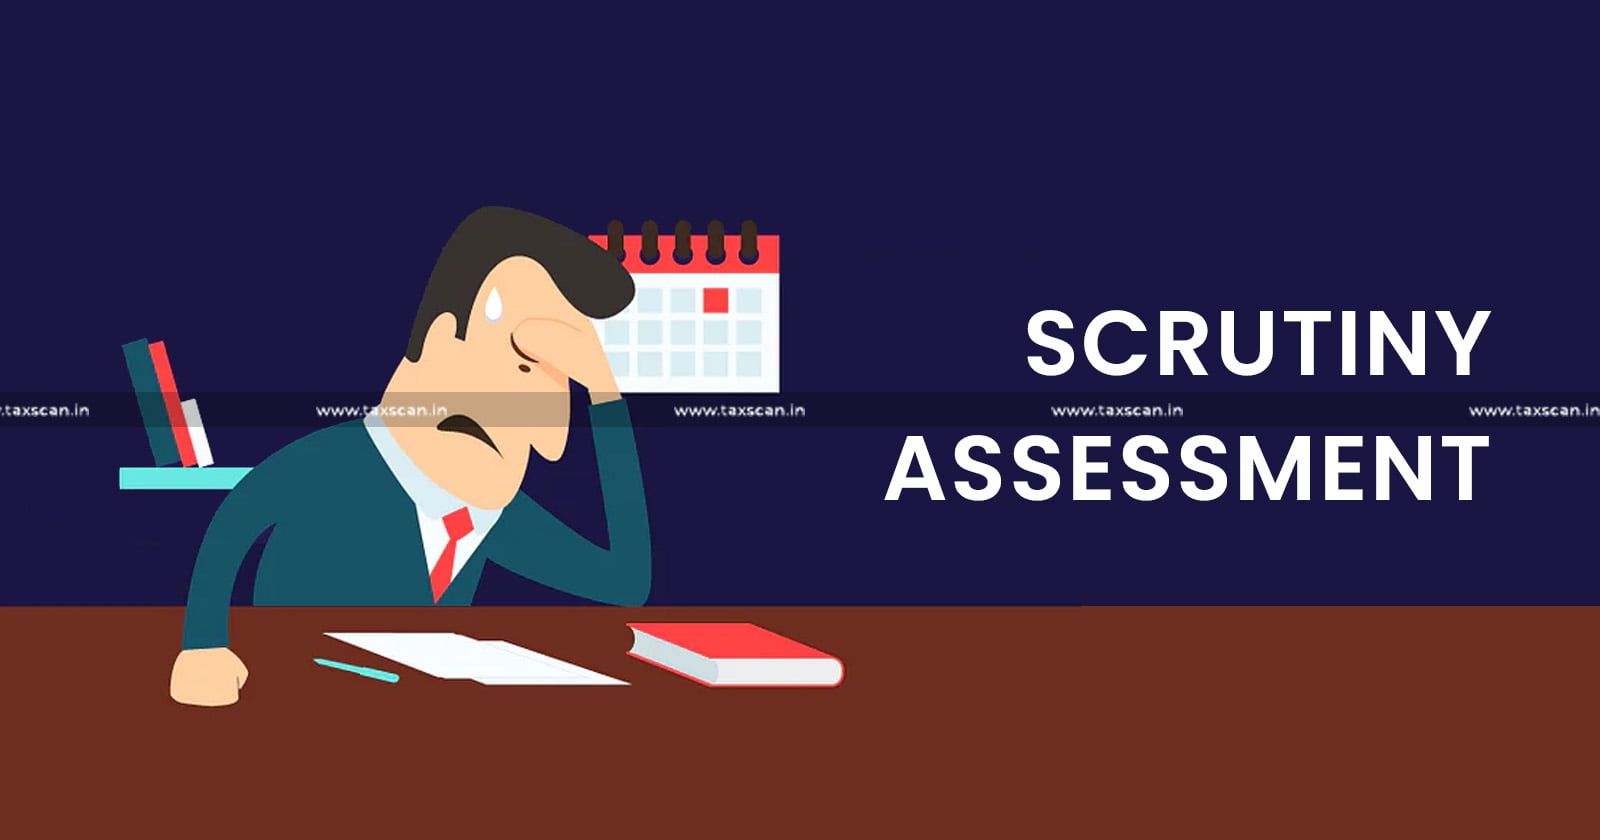 Madras HC - WP - Revision Order - Scrutiny Assessment Order - IT Act - Statutory Appeal - taxscan